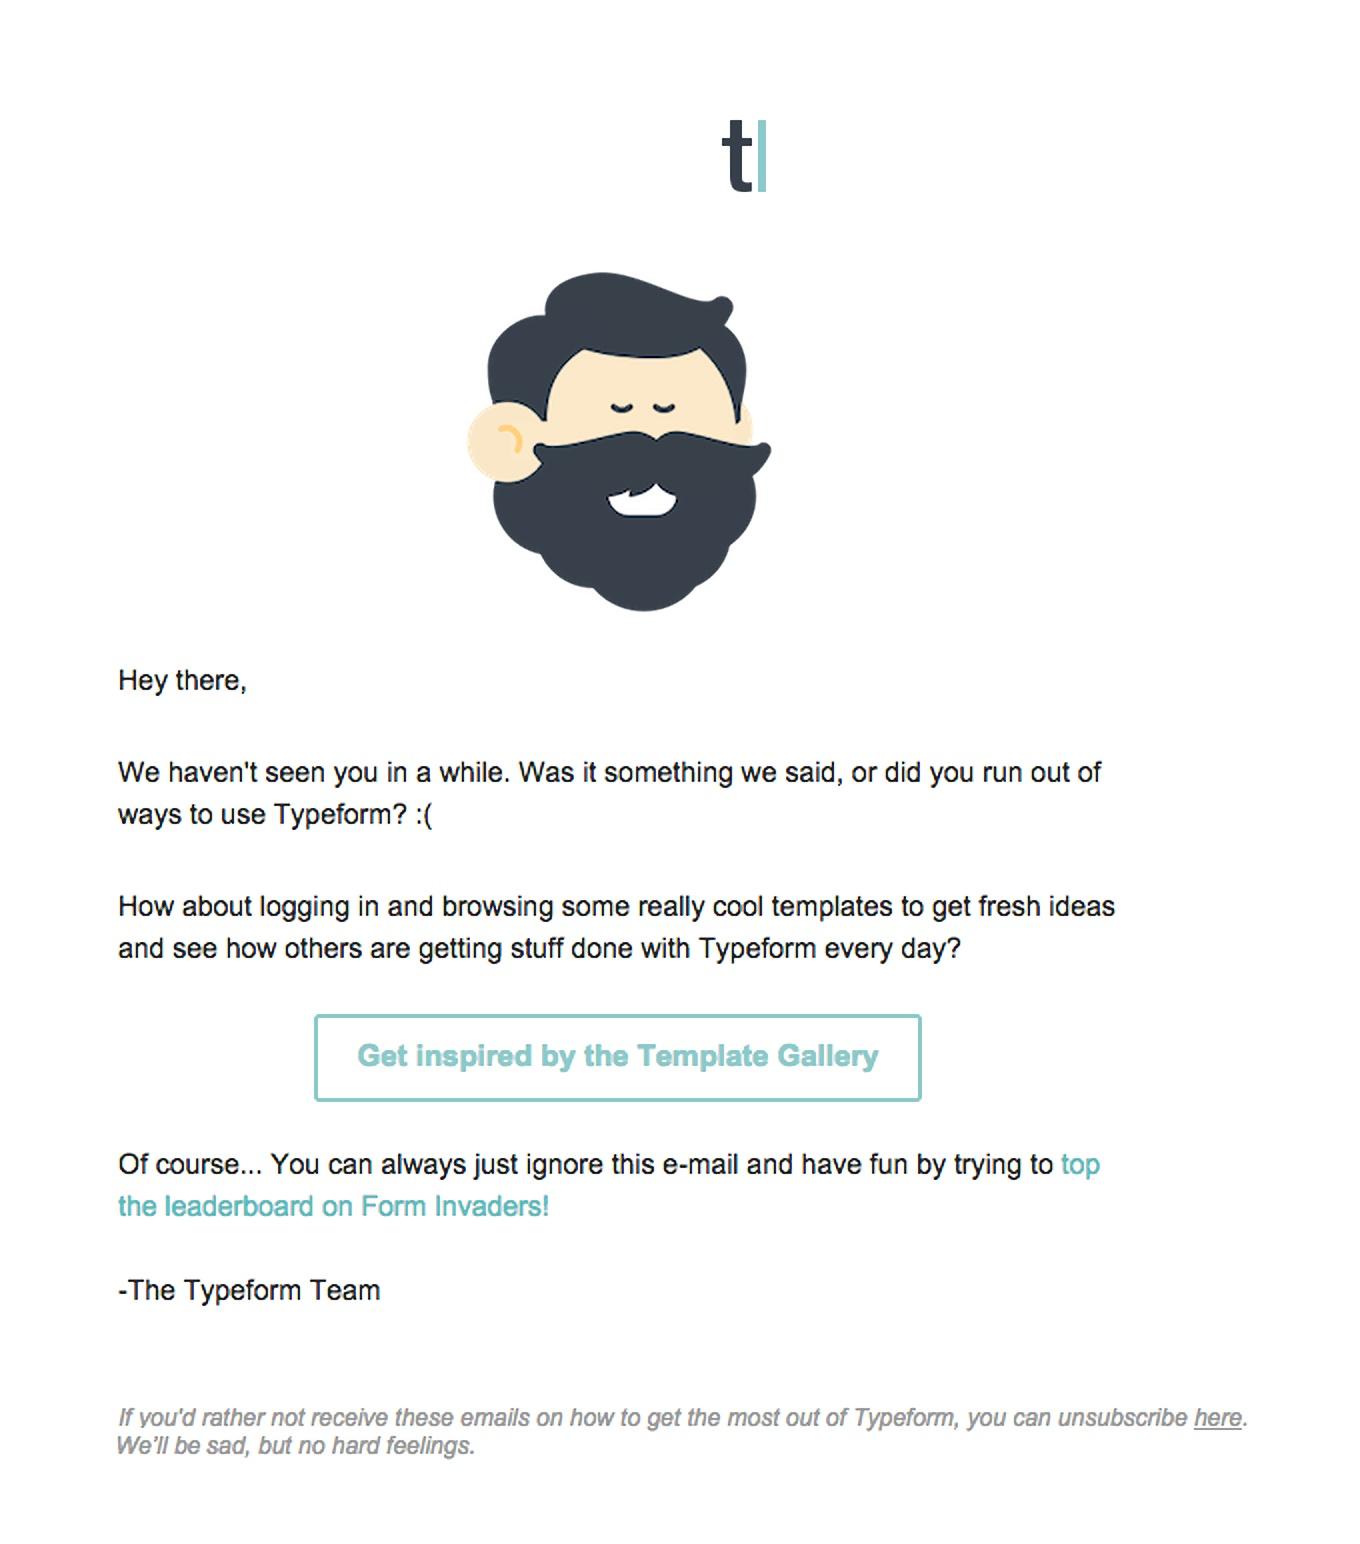 Re-engagement Email Example from Typeform